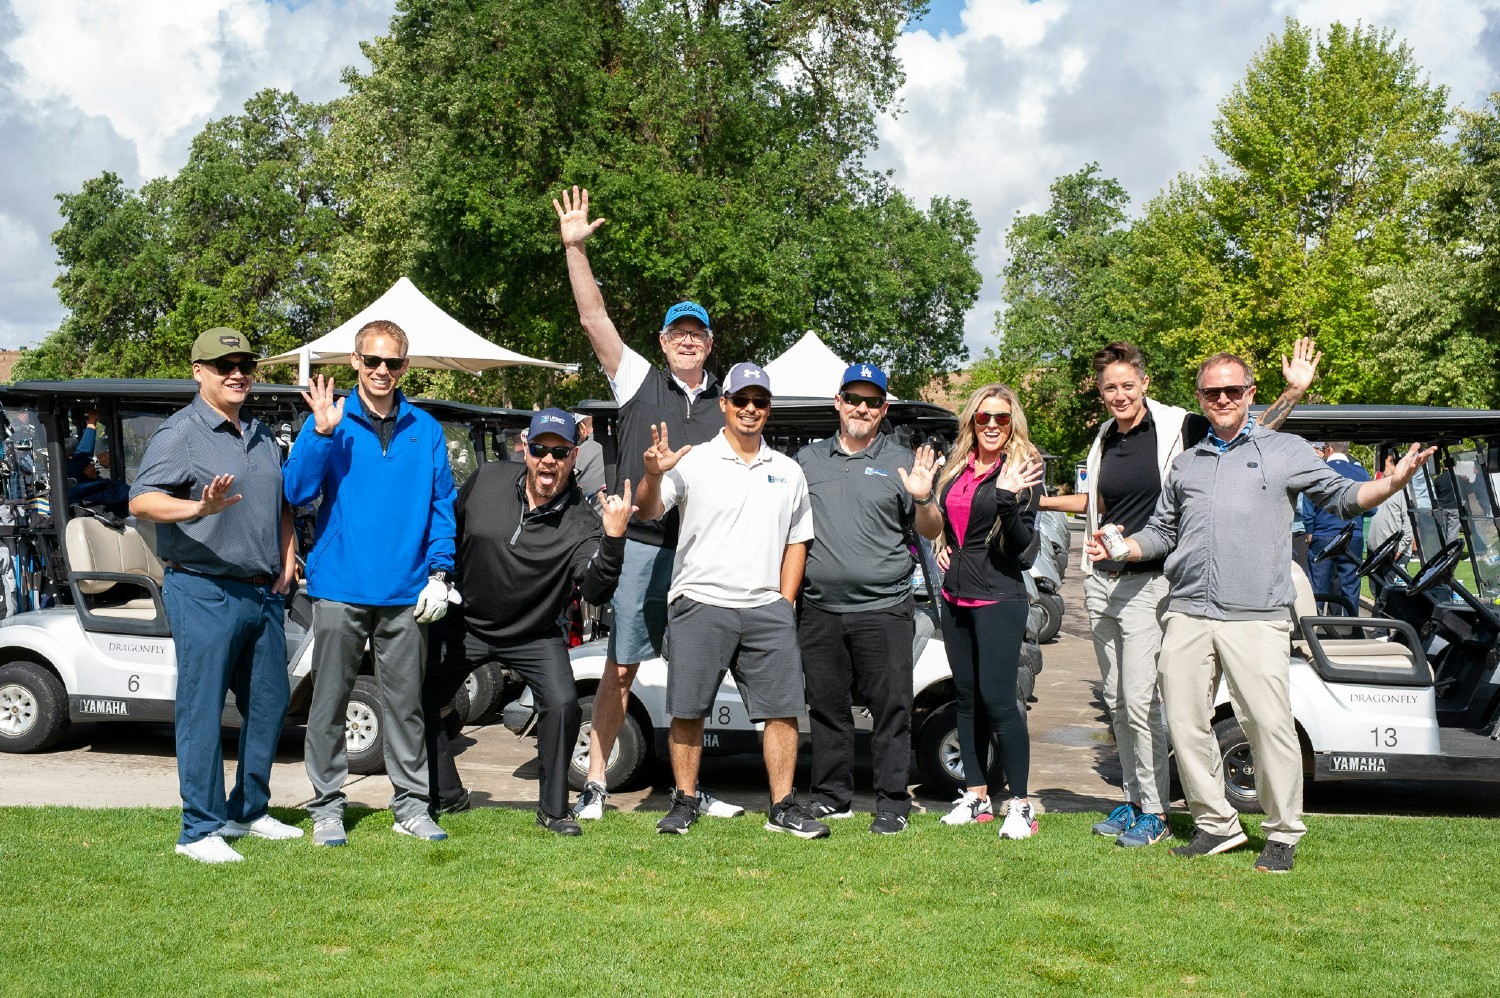 Team Legacy ready to compete at a fundraising golf tournament for one of our clients!